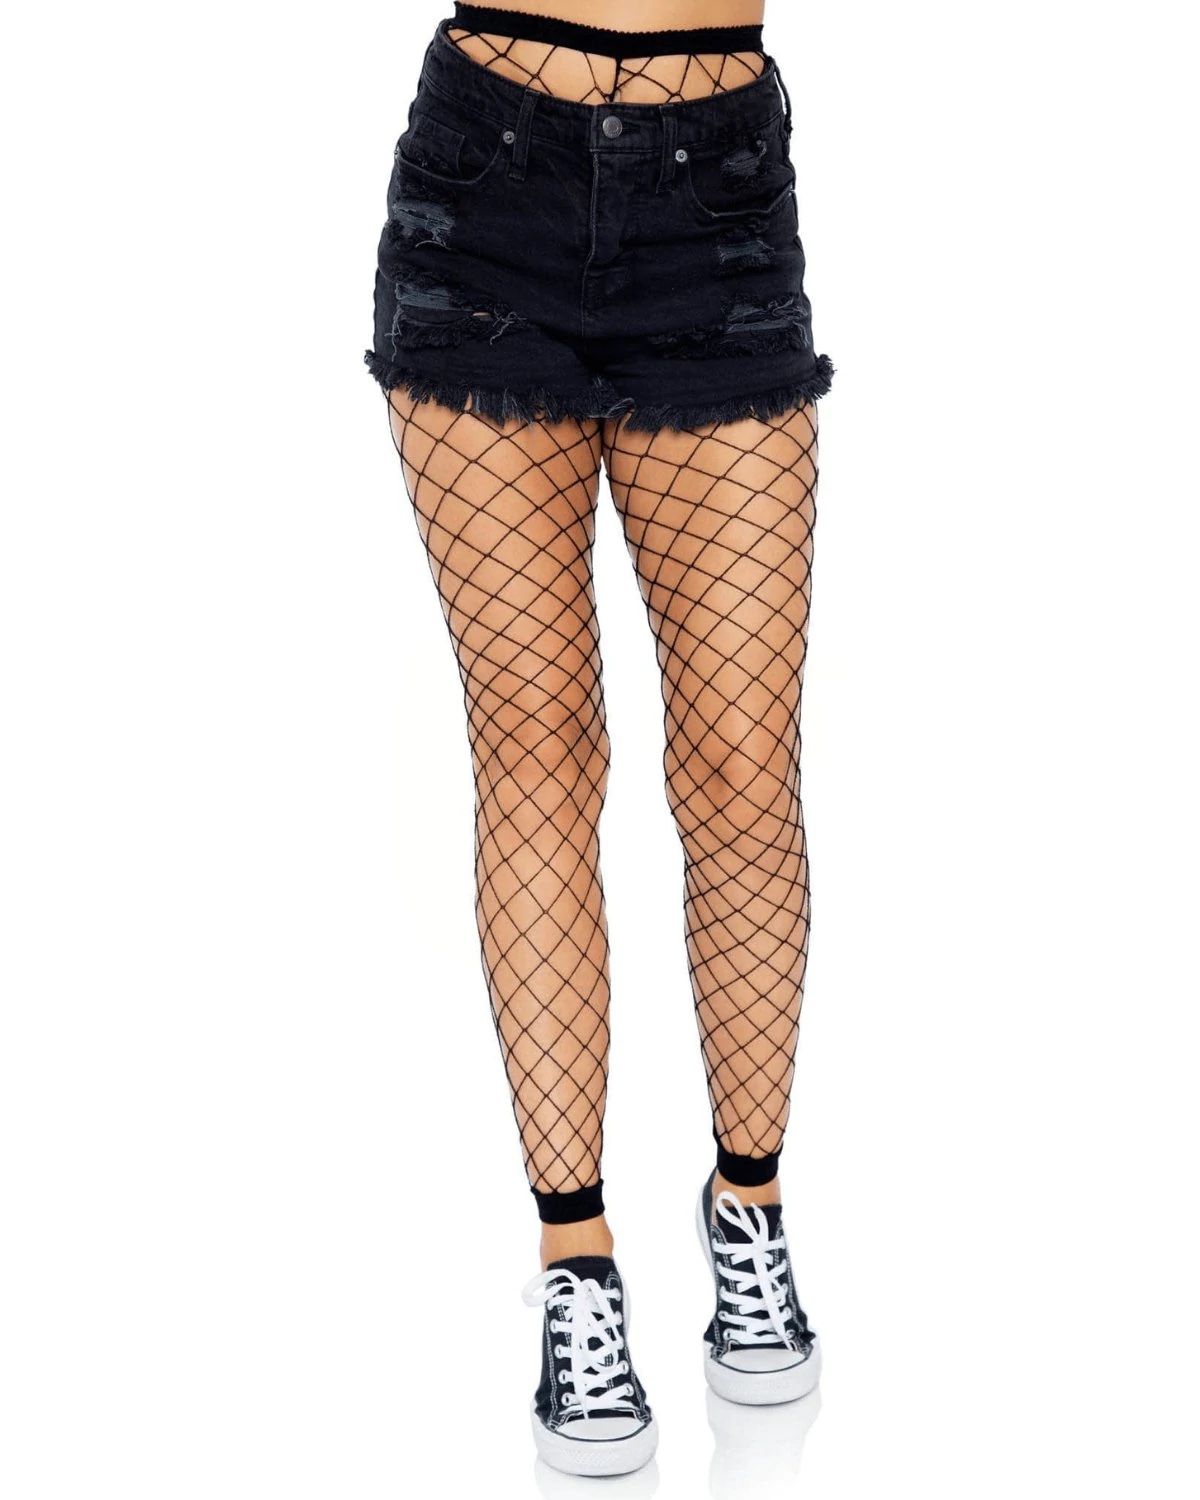  Footless Fishnet Tights